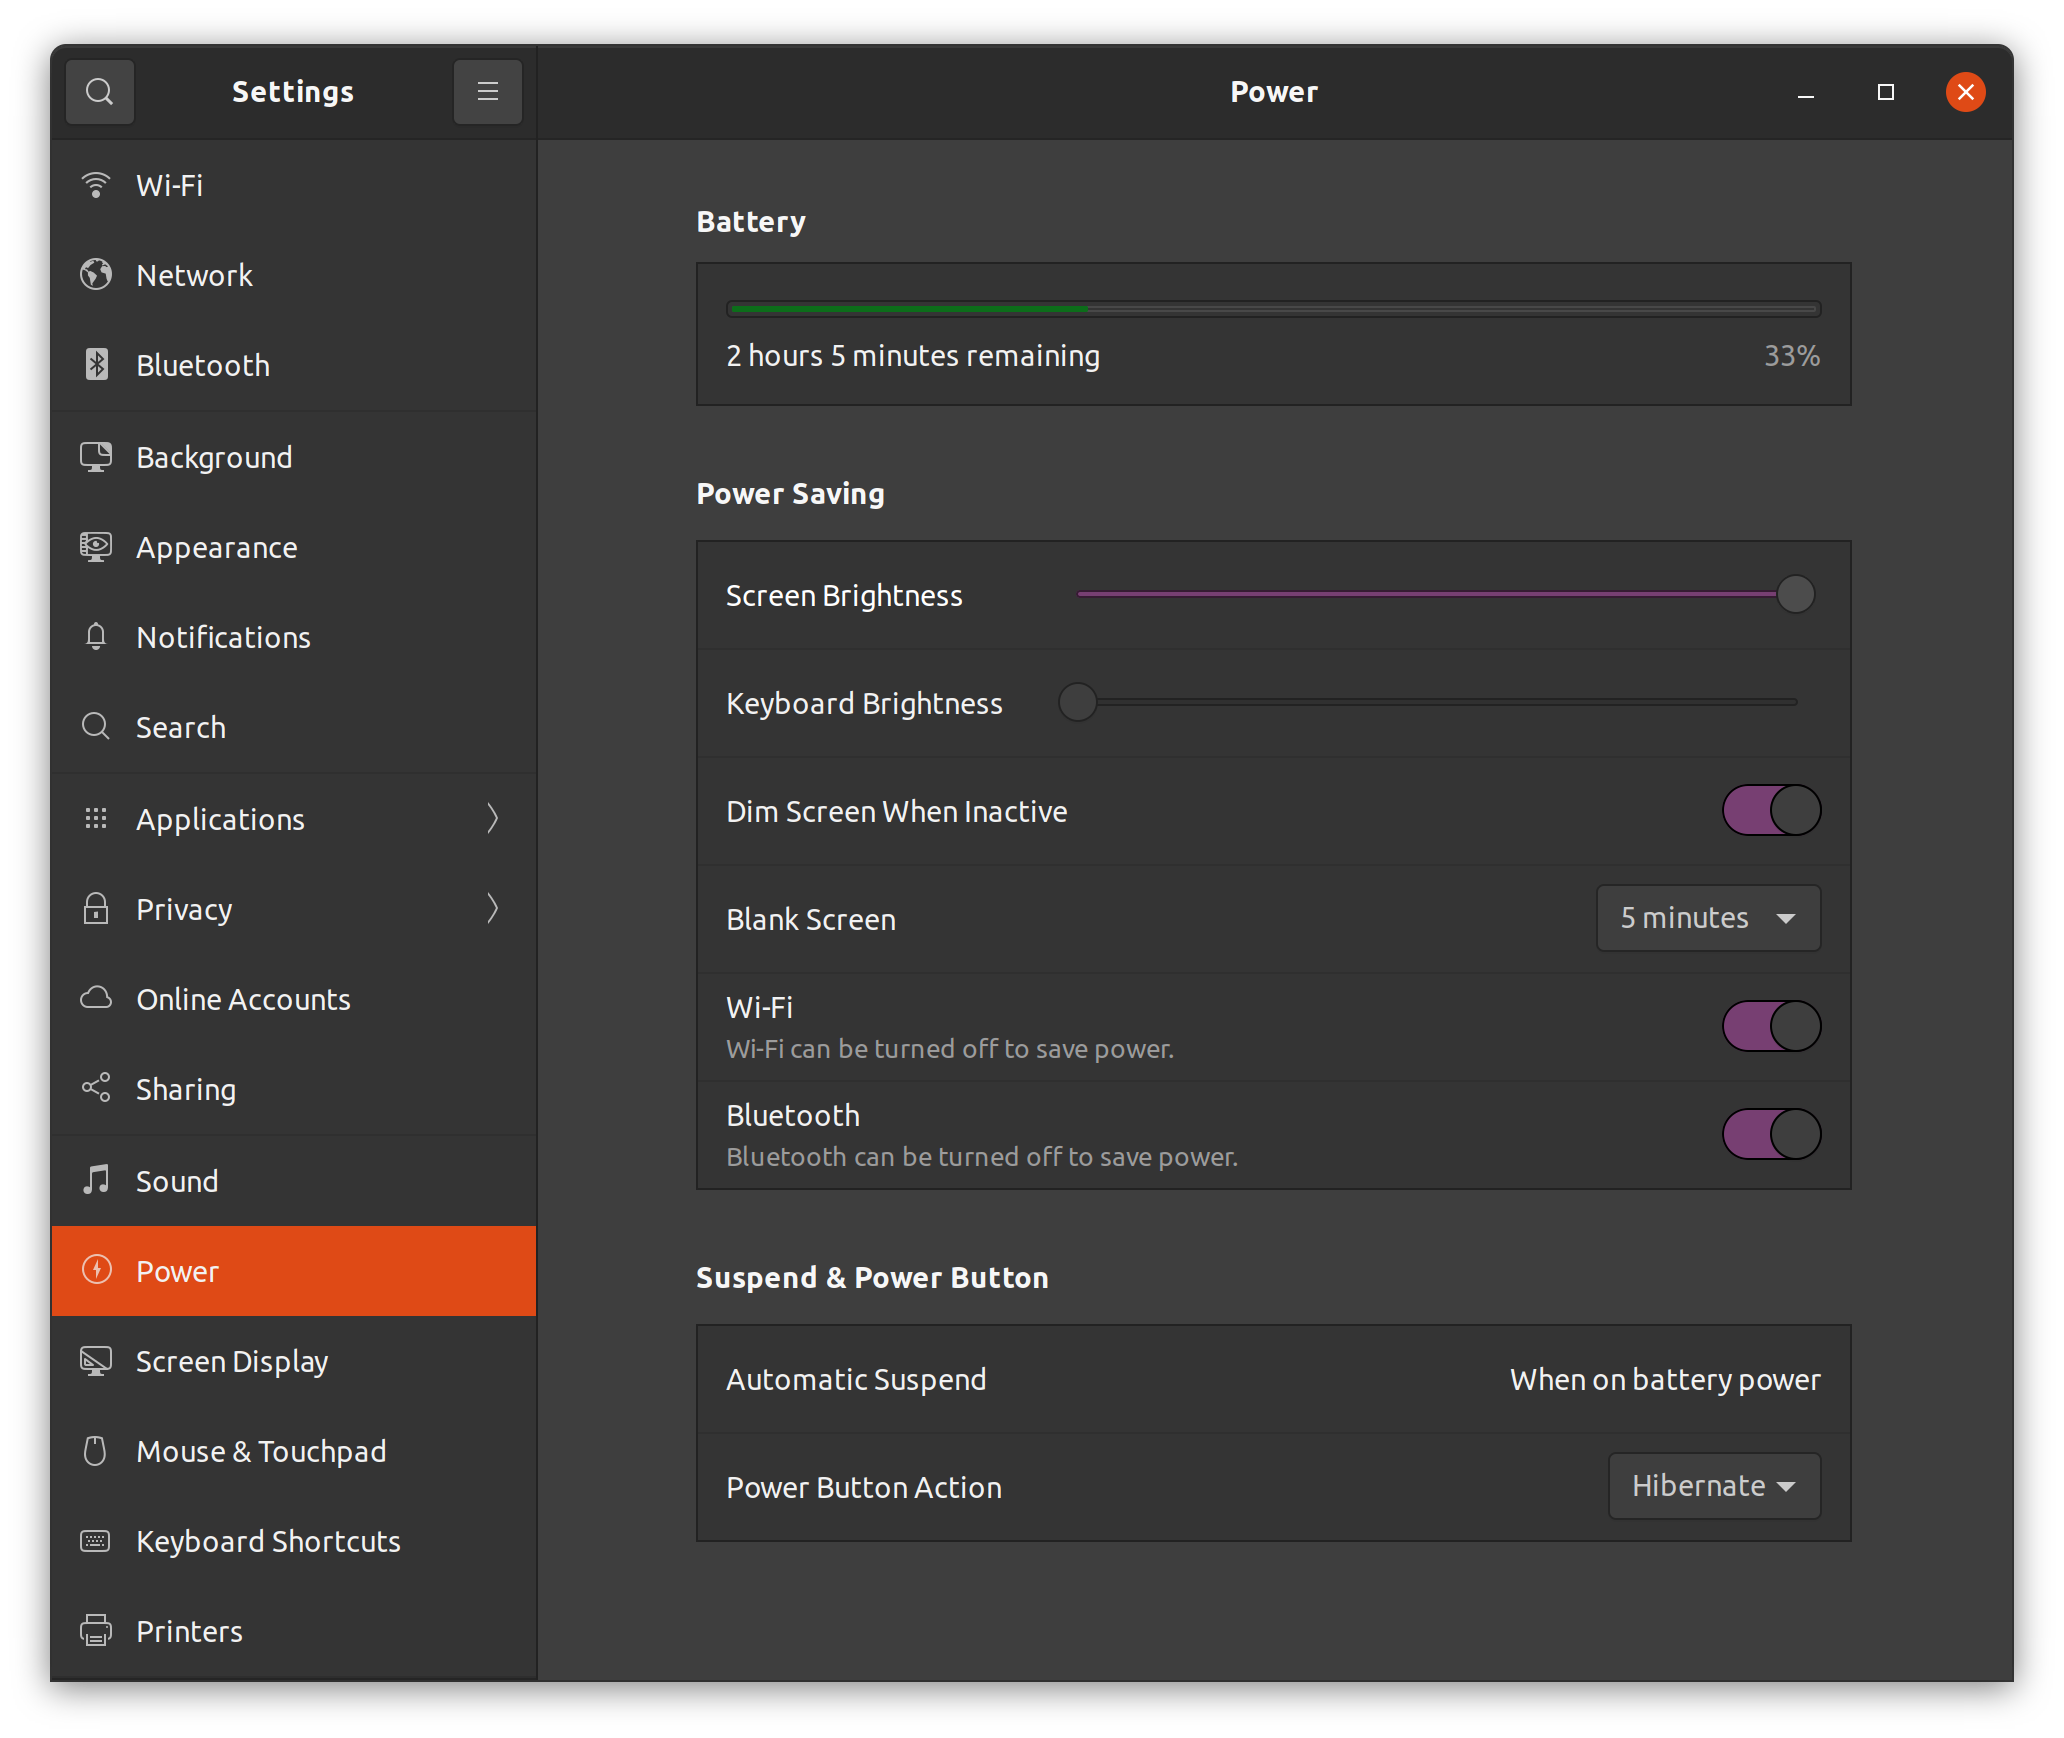 The GNOME power settings menu with hibernate available as a power button action